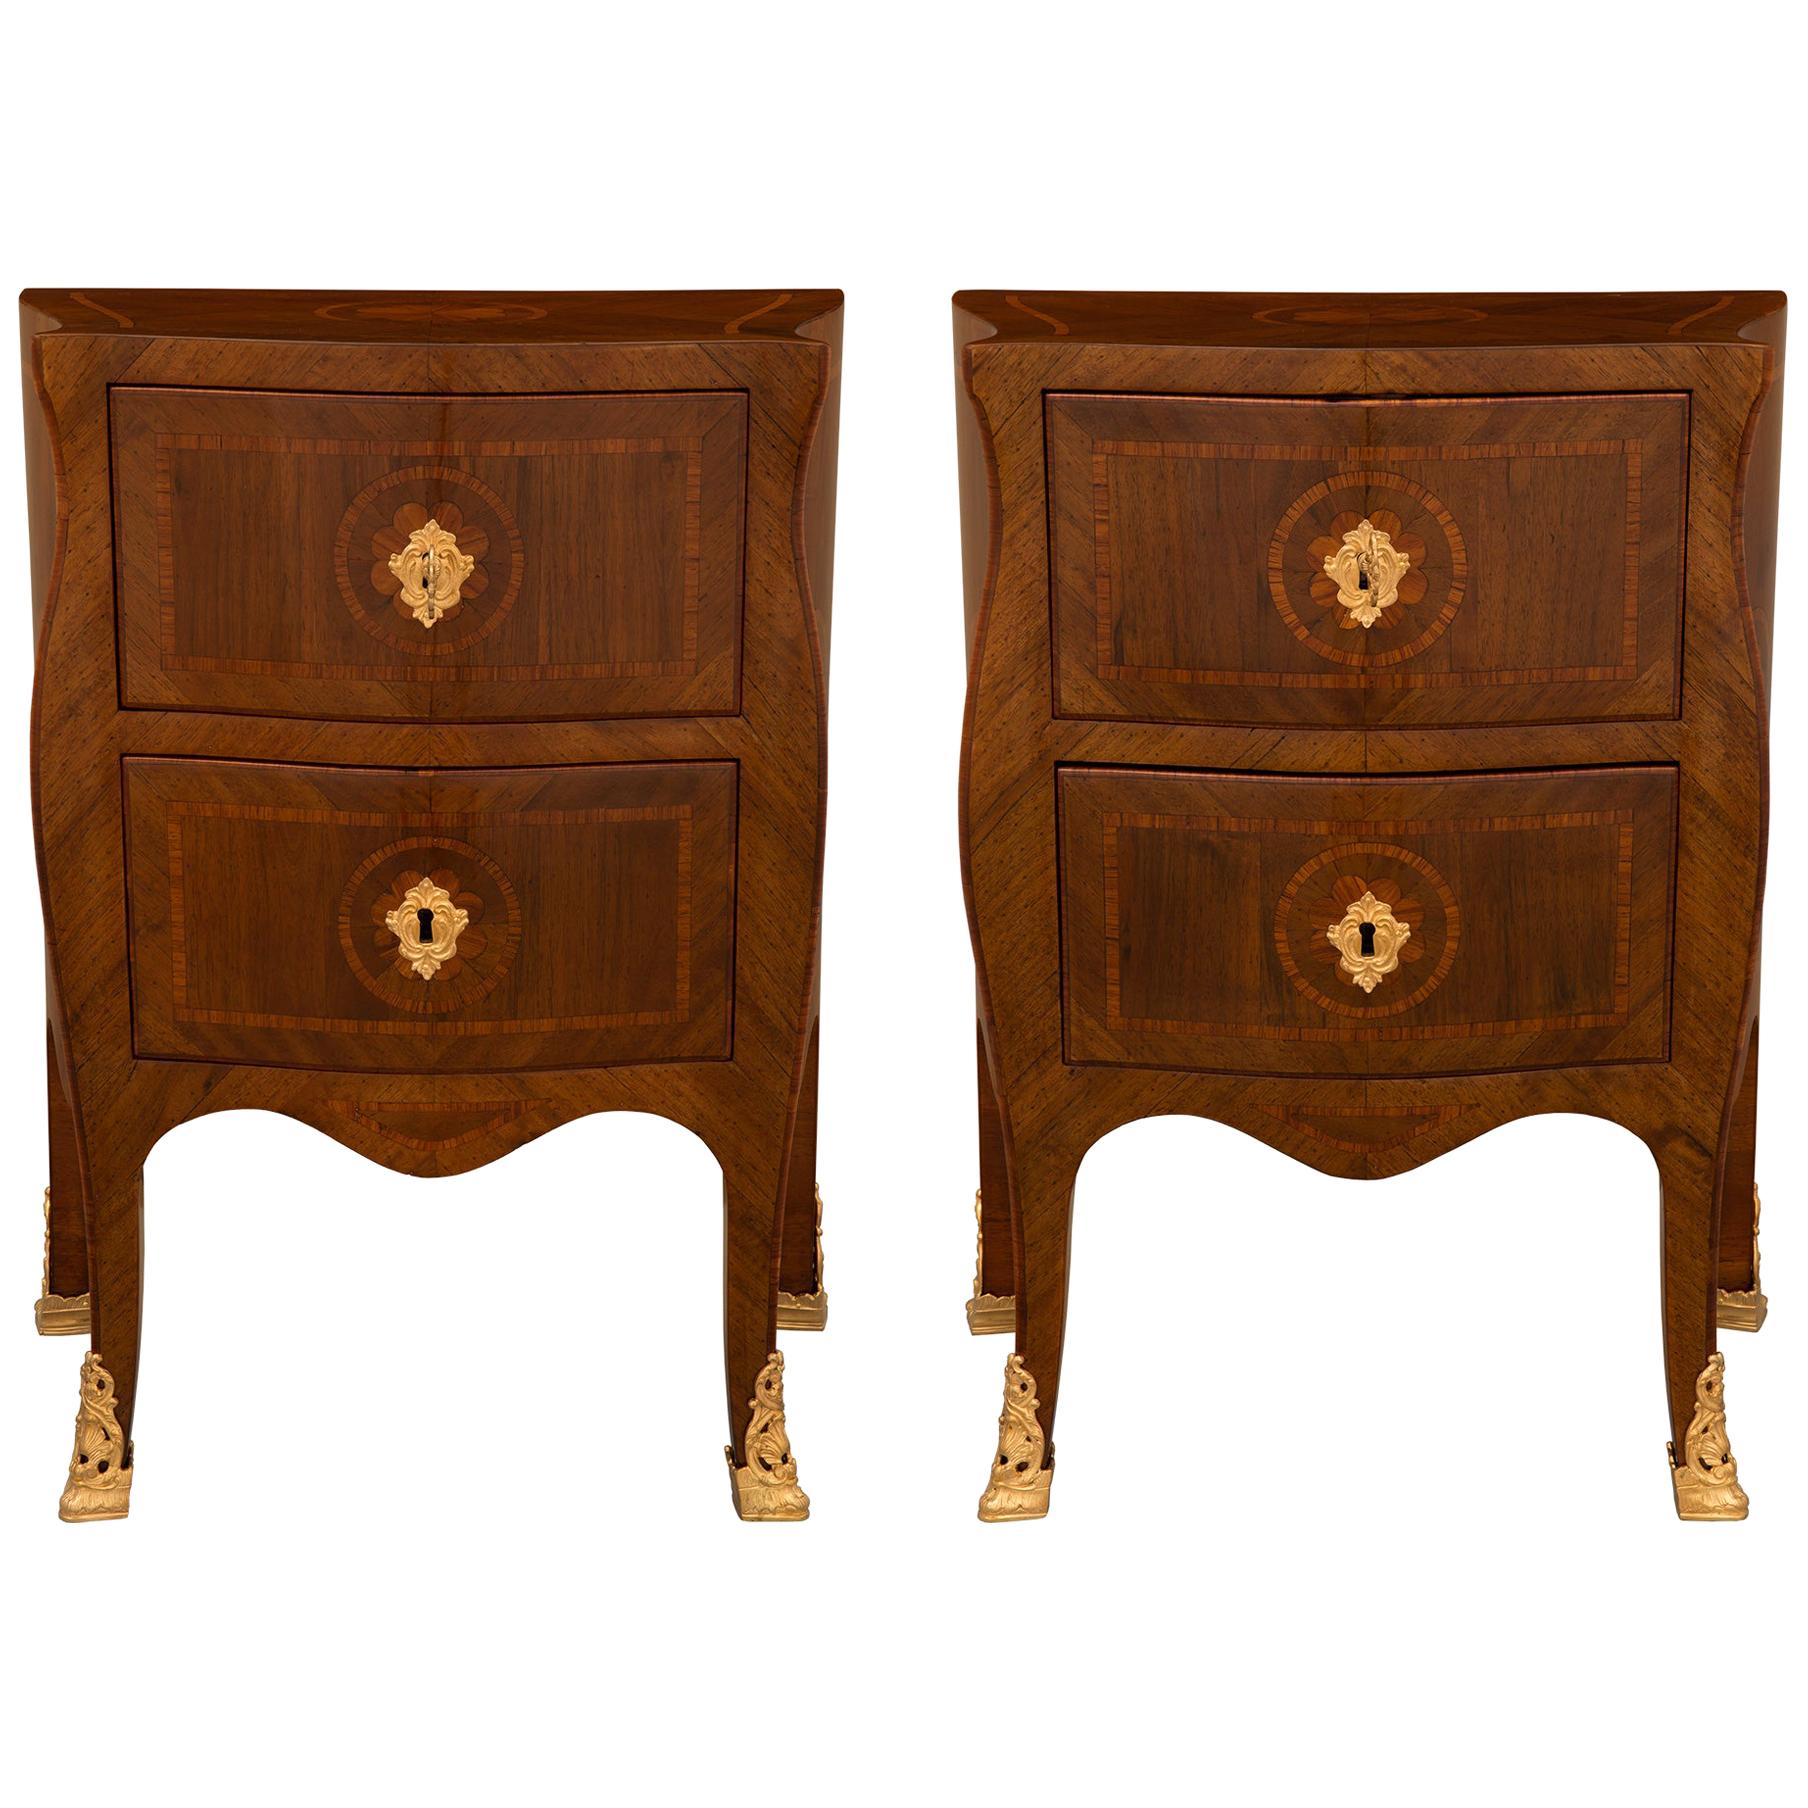 Pair of Italian 19th Century Louis XV Style Genovese Commodes